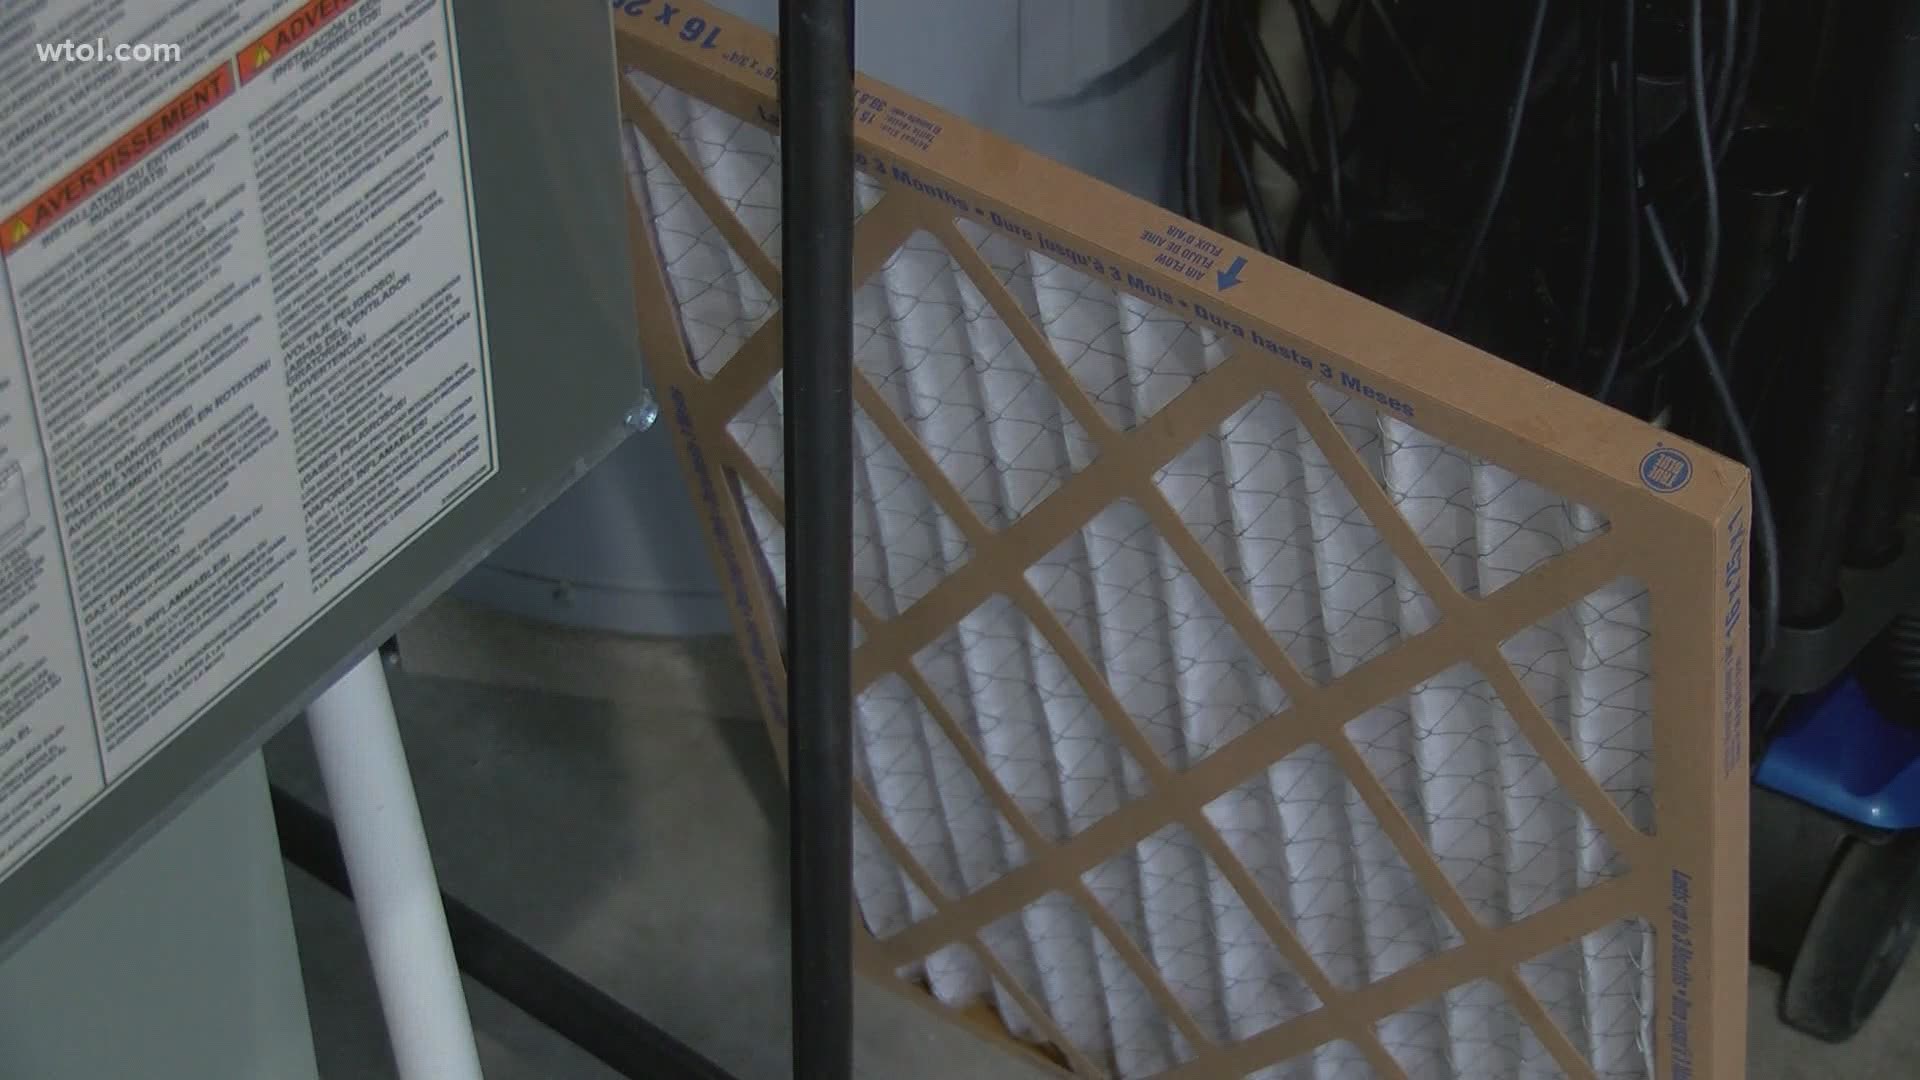 A local heating and air conditioning expert gives us the best tips to stay warm and safe.